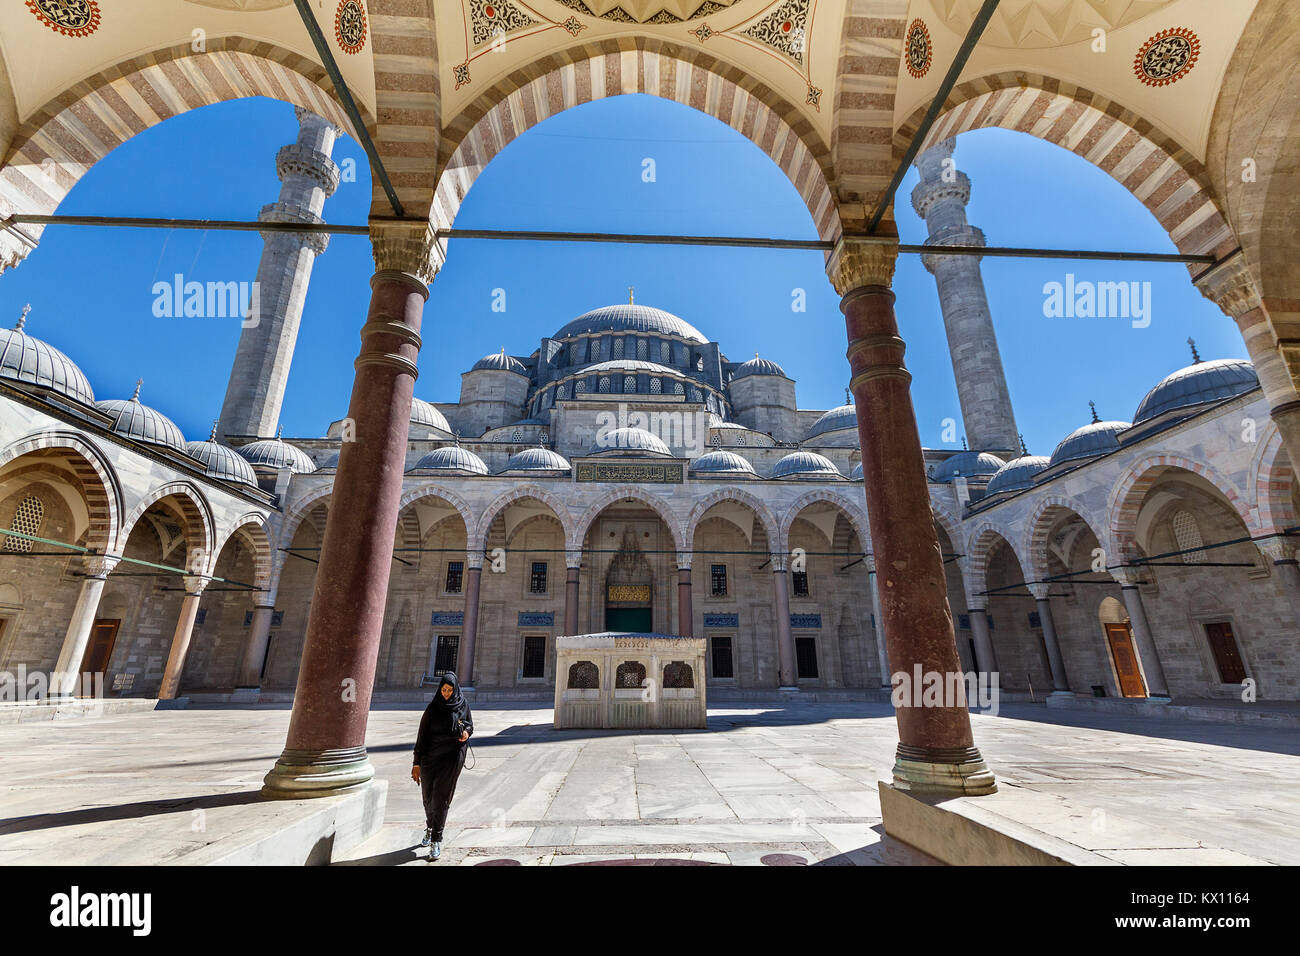 Arches and pillars in the courtyard of the Suleymaniye Mosque in Istanbul, Turkey. Stock Photo